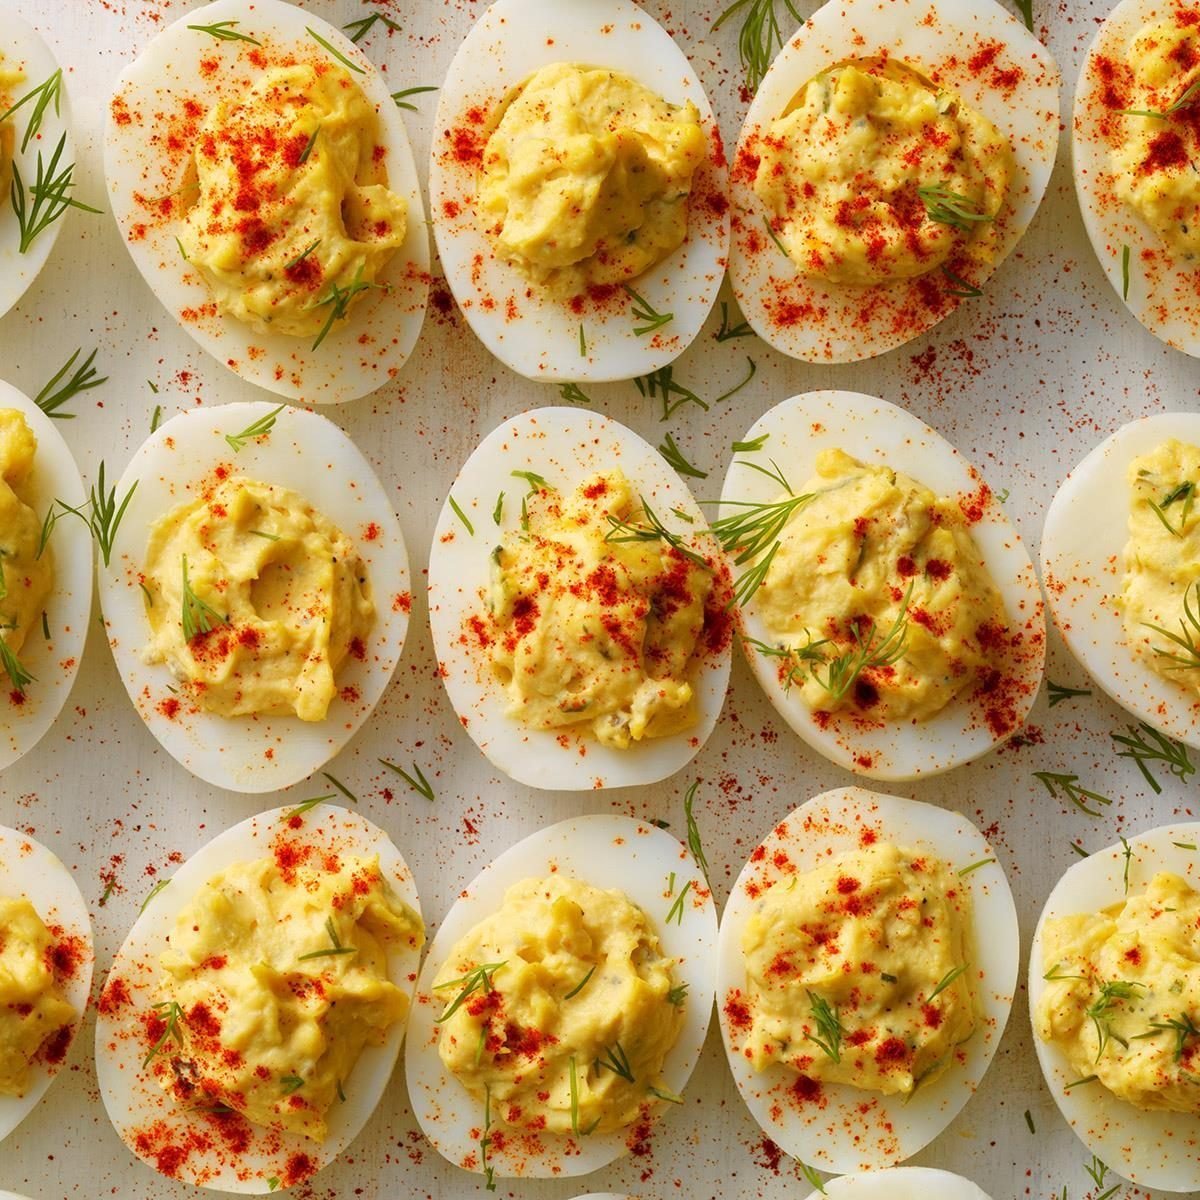 Here's How to Make the Best Deviled Eggs